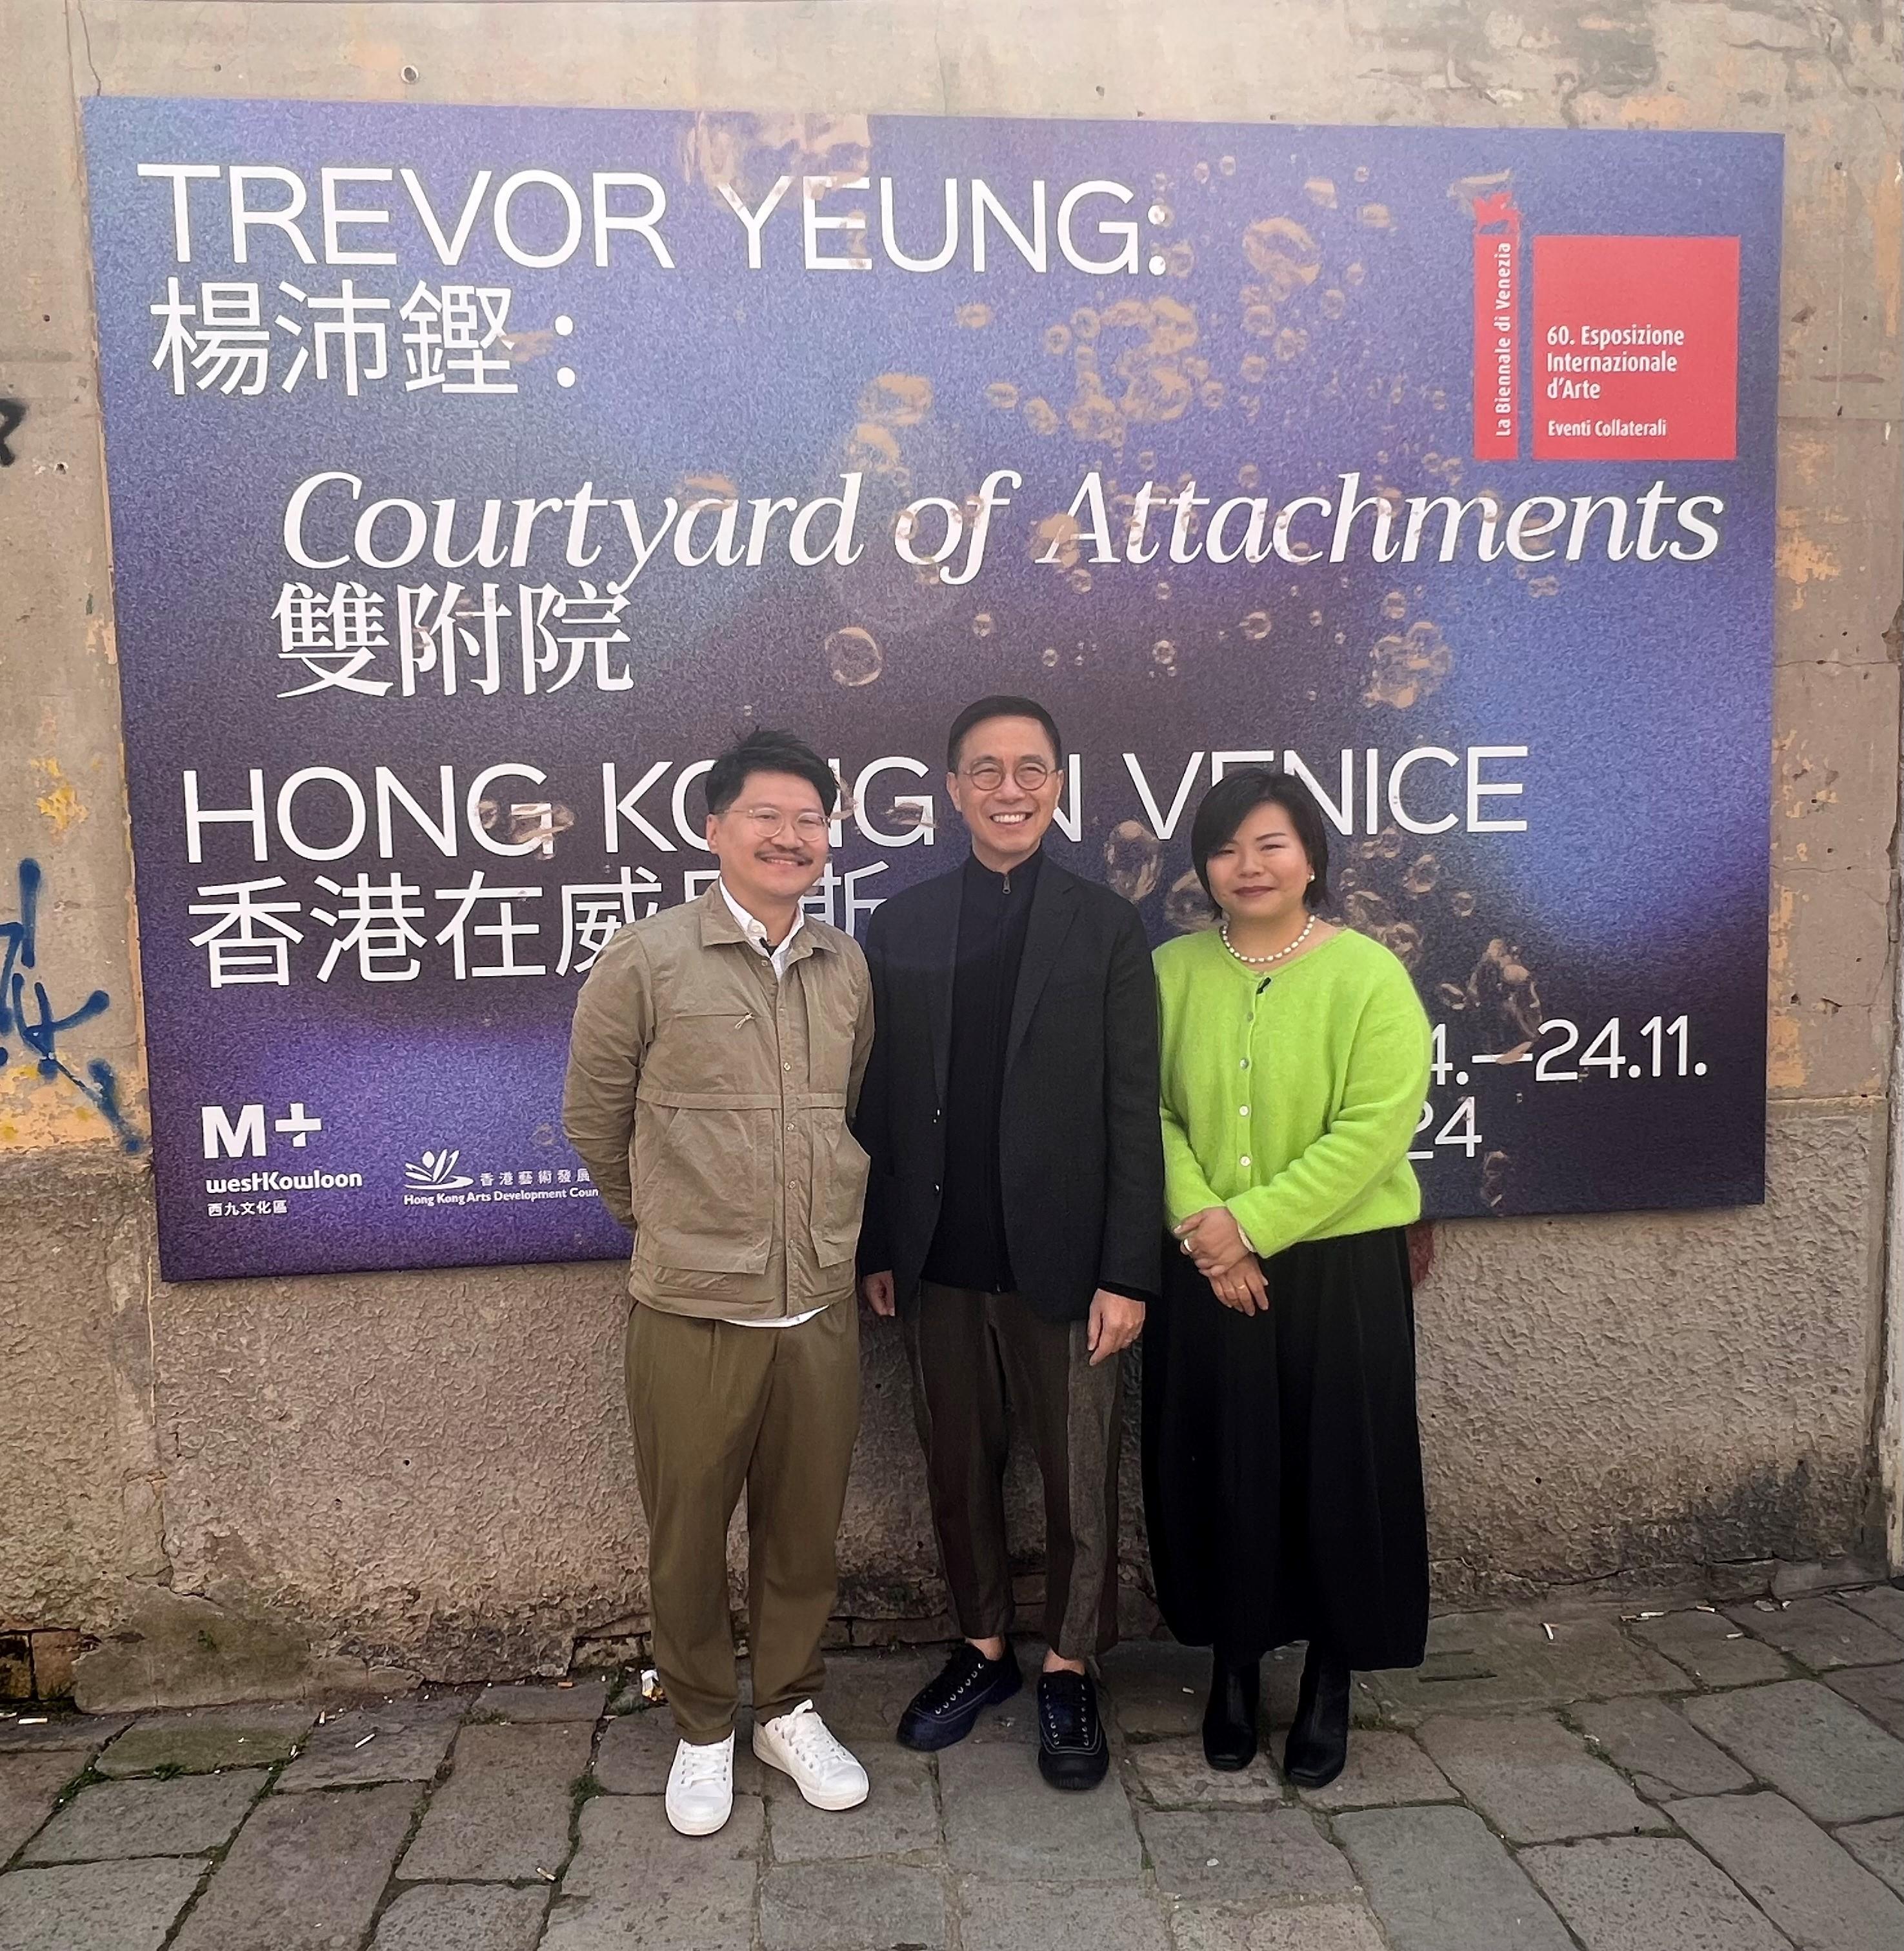 The Secretary for Culture, Sports and Tourism, Mr Kevin Yeung (centre), officiated at the opening ceremony of the Hong Kong exhibition at the Venice Biennale in Venice, Italy, yesterday (April 19, Venice time). He exchanged views with Hong Kong artist Trevor Yeung (left) and curator Olivia Chow (right).